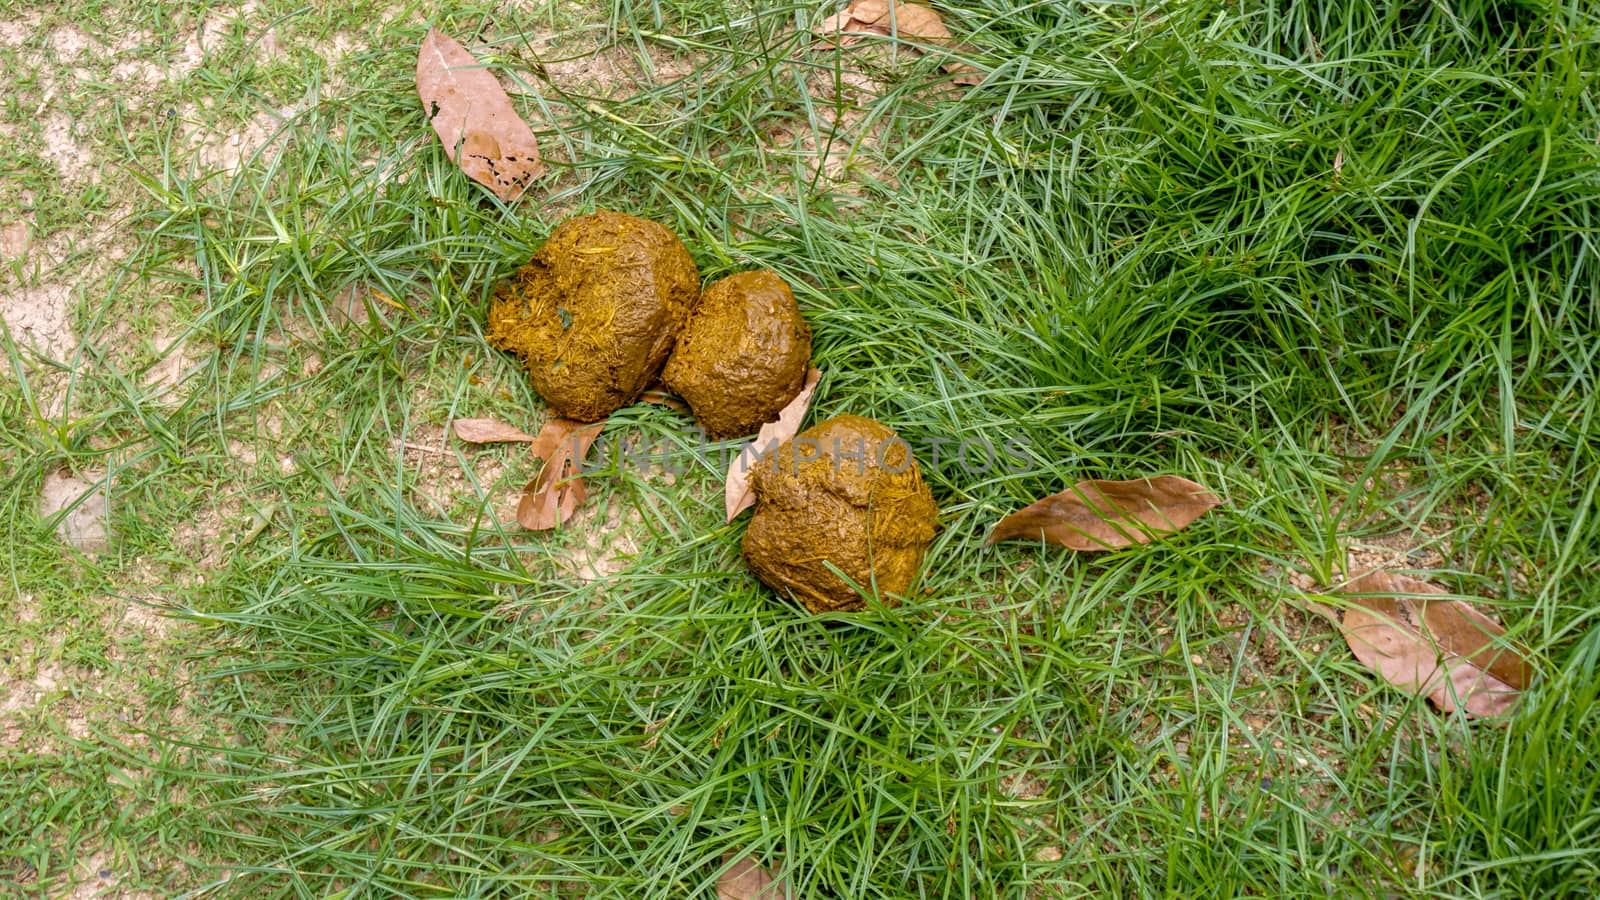 Fresh elephant feces on the grass. Elephant dung on the ground. Elephant poop